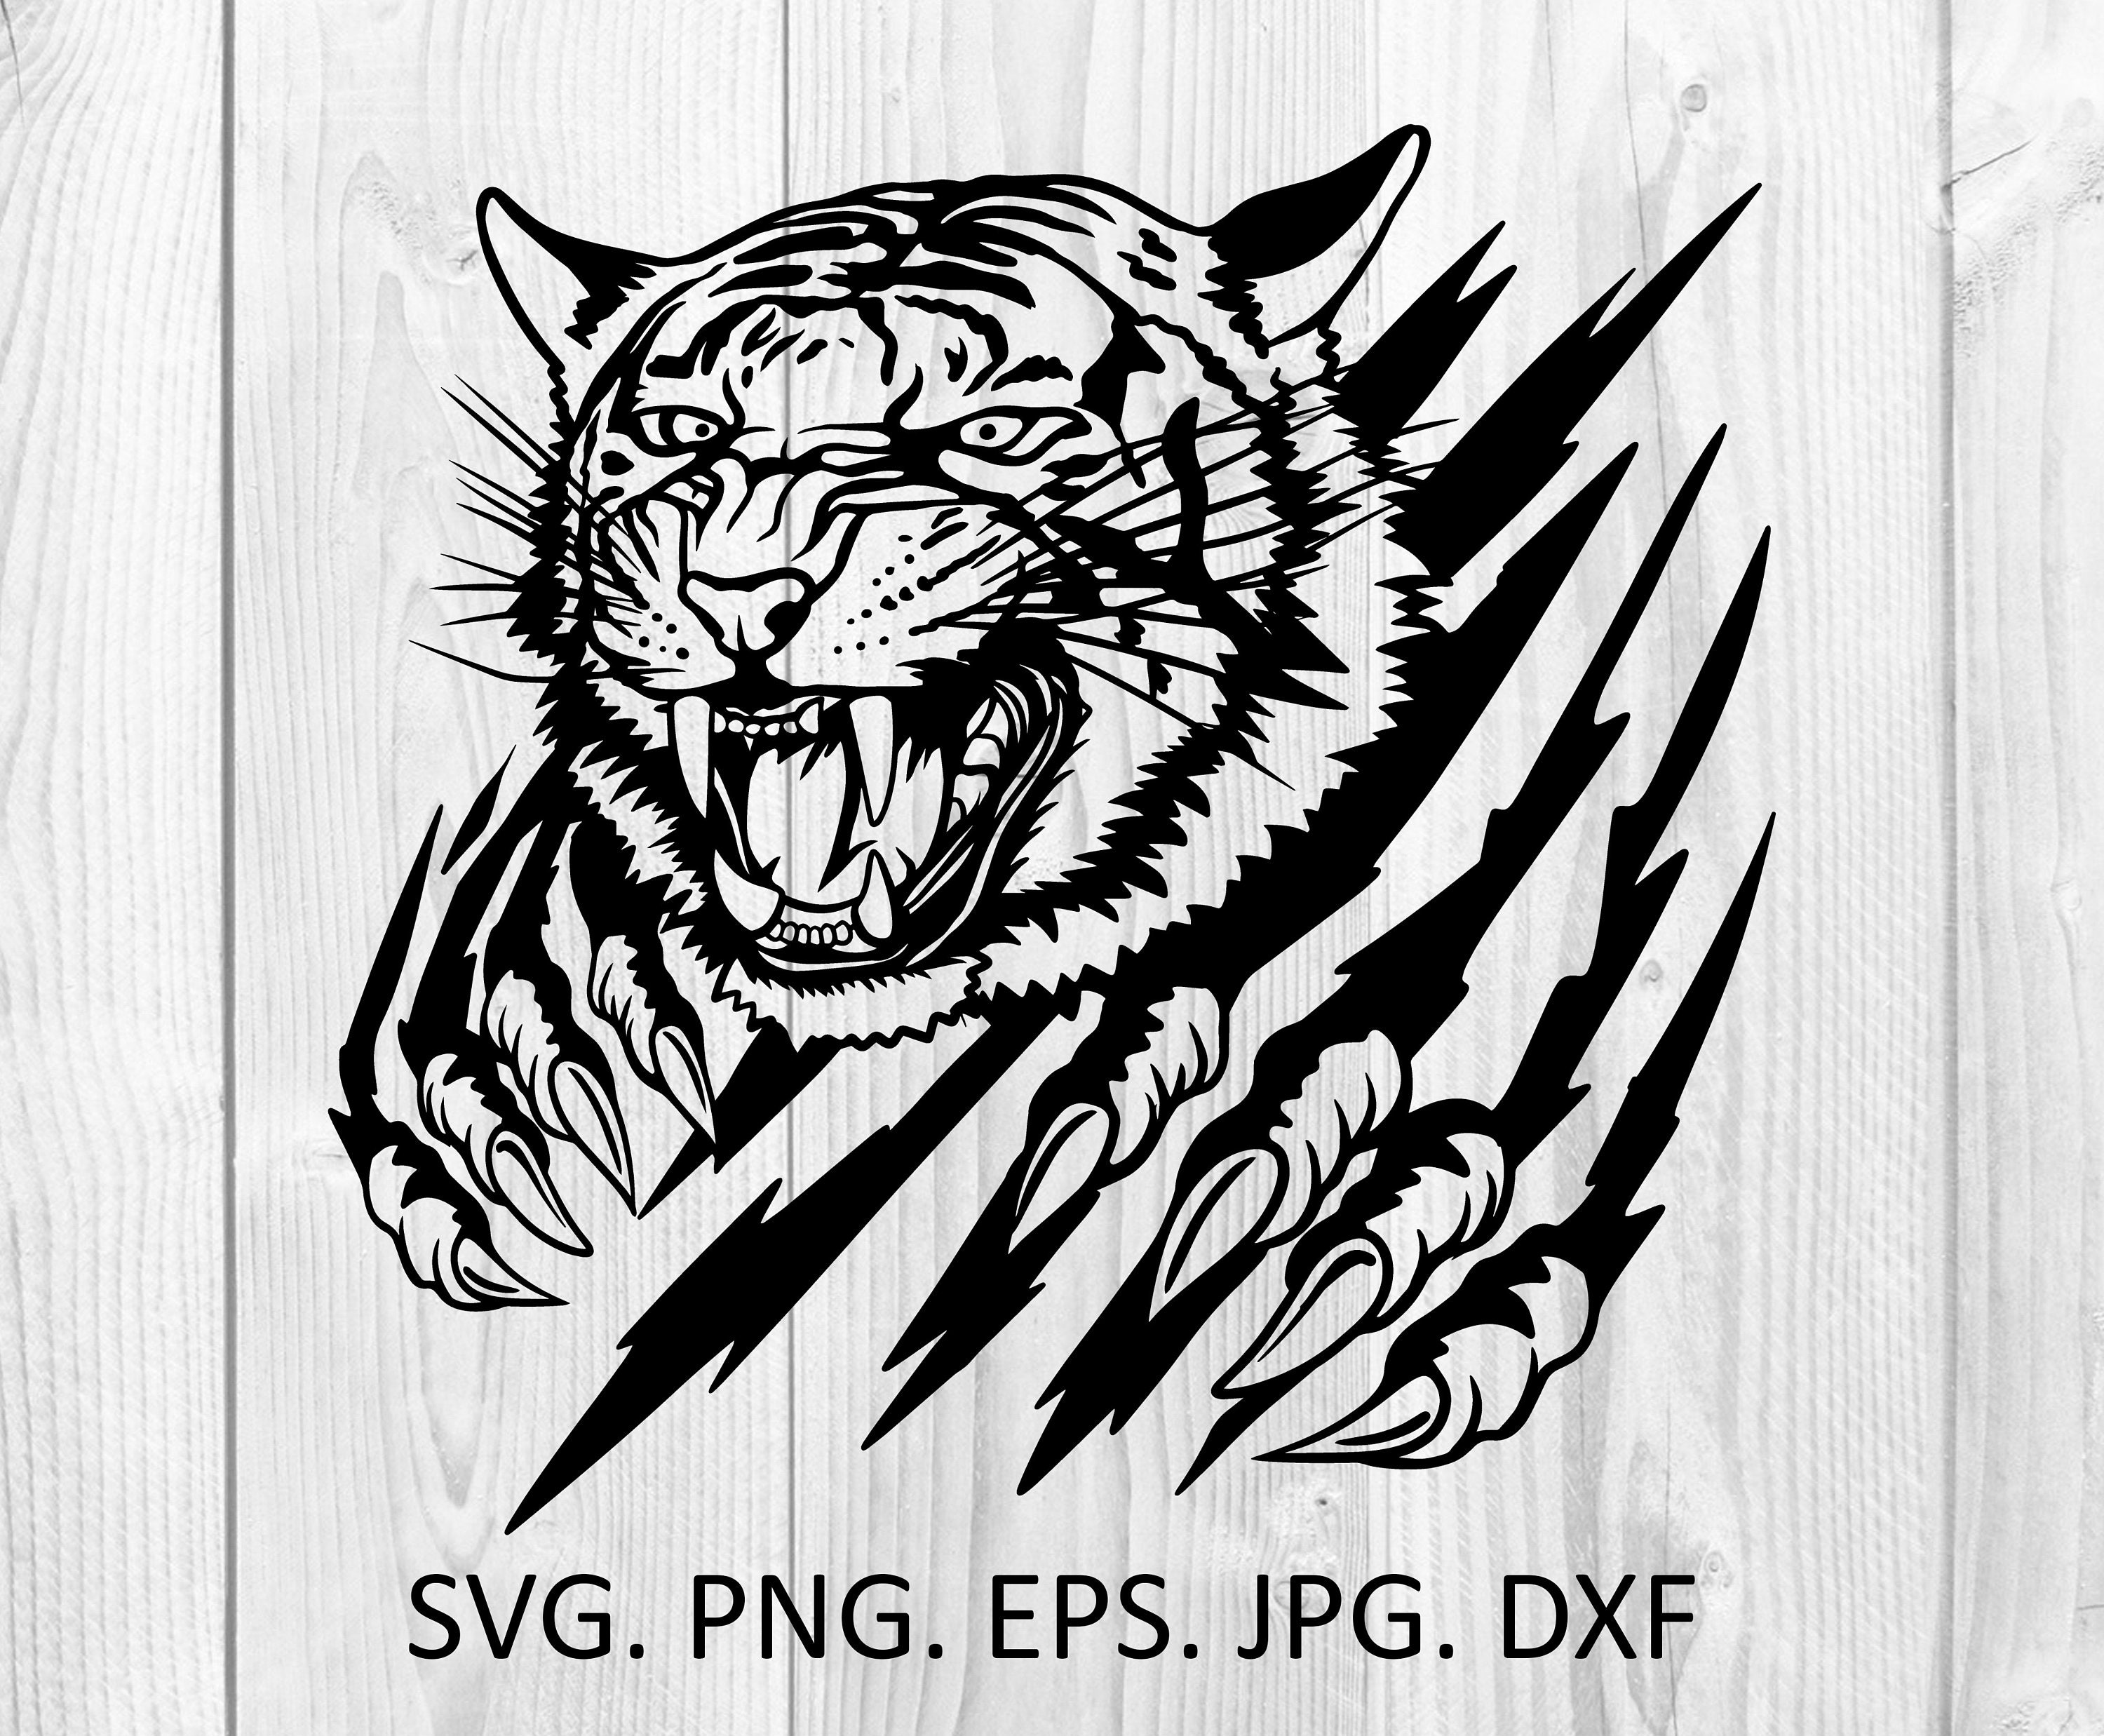 Tiger svg, Tiger cut file. Eyes Tiger svg.Angry tiger head with claws.Tiger  T-shirt design.Vinyl Decal Plotter Svg,Eps,Png,Dxf.Tiger Cricut